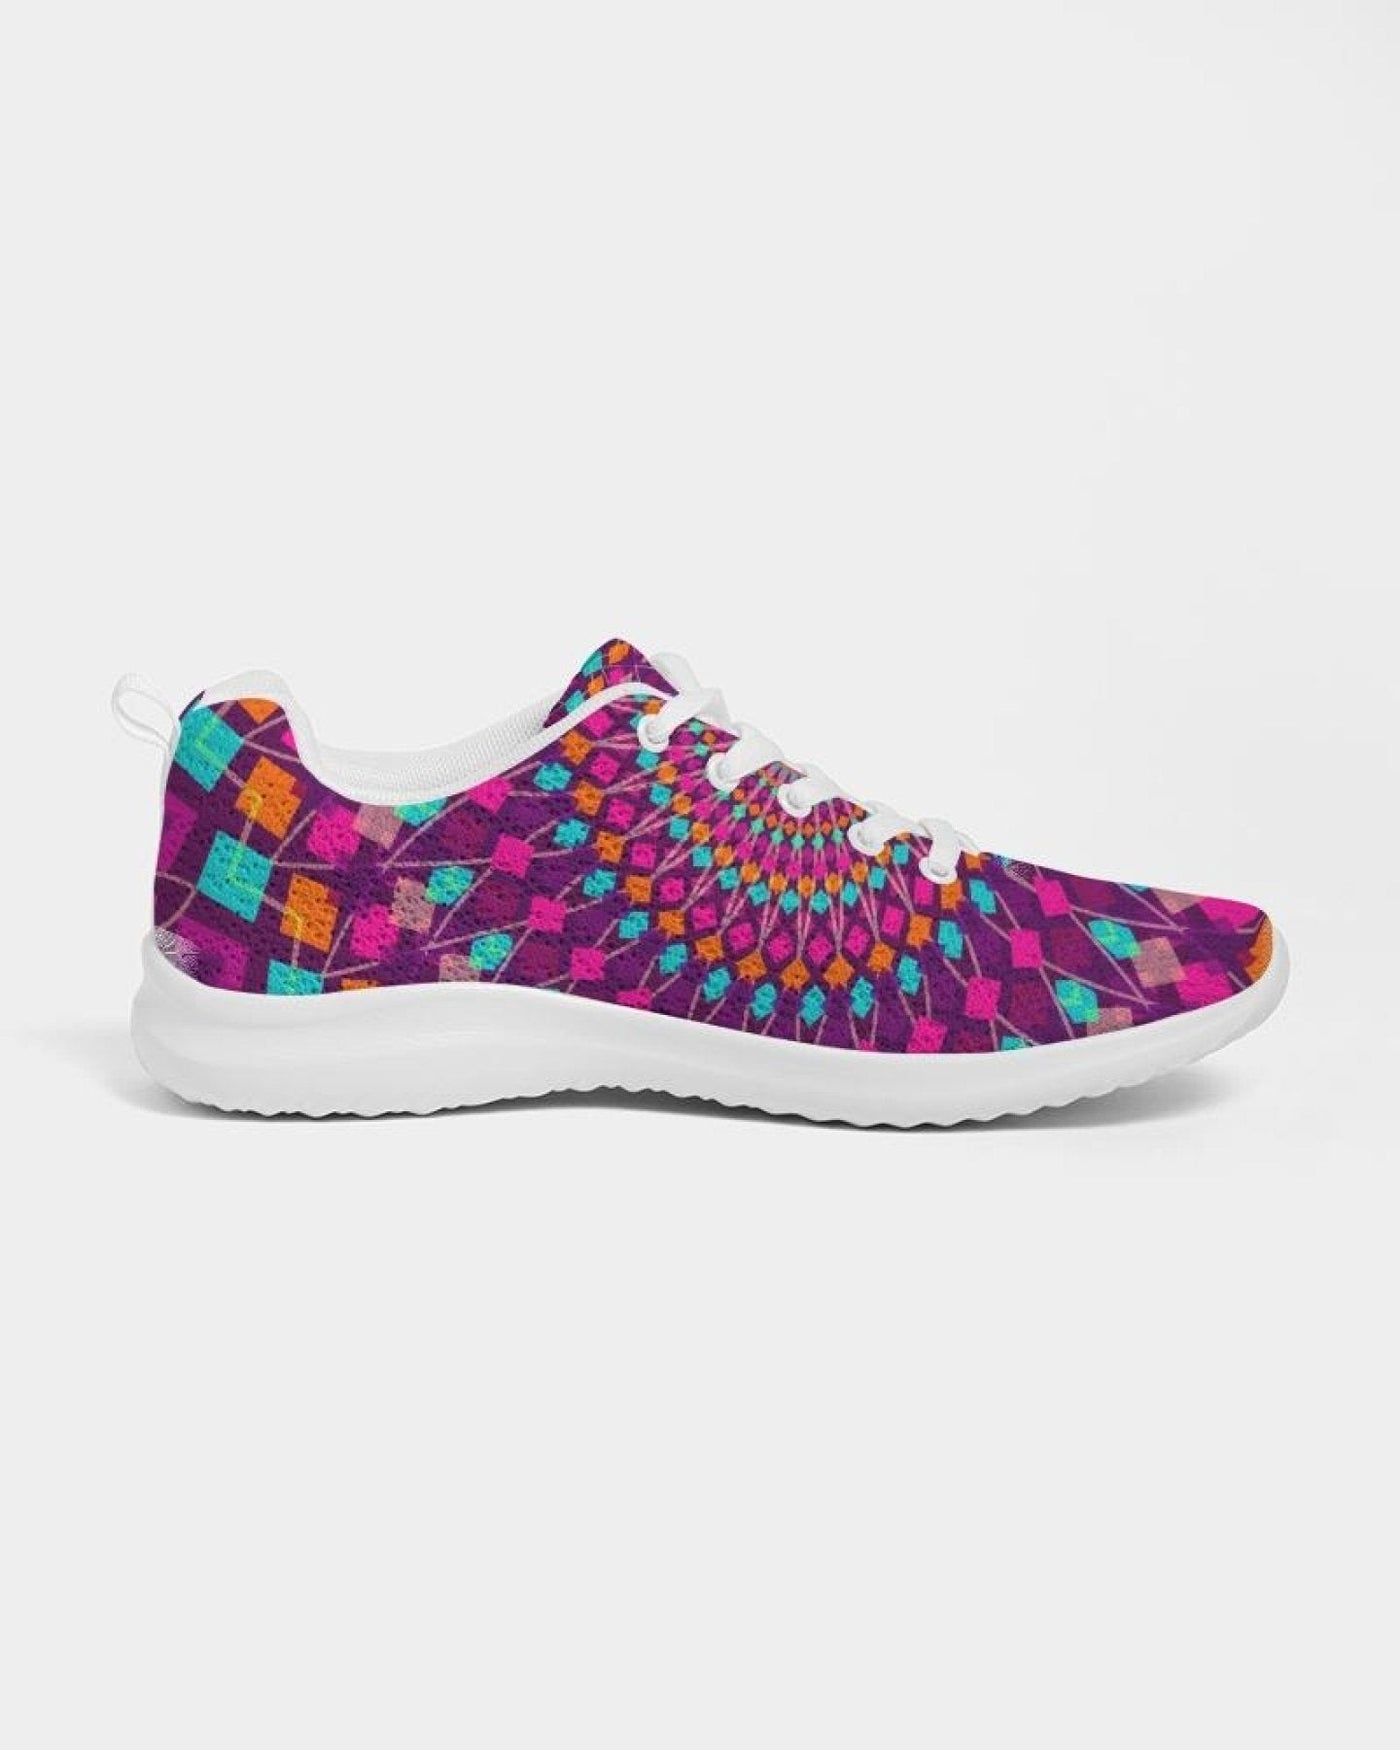 Womens Sneakers - Purple Kaleidoscope Style Canvas Sports Shoes / Running -